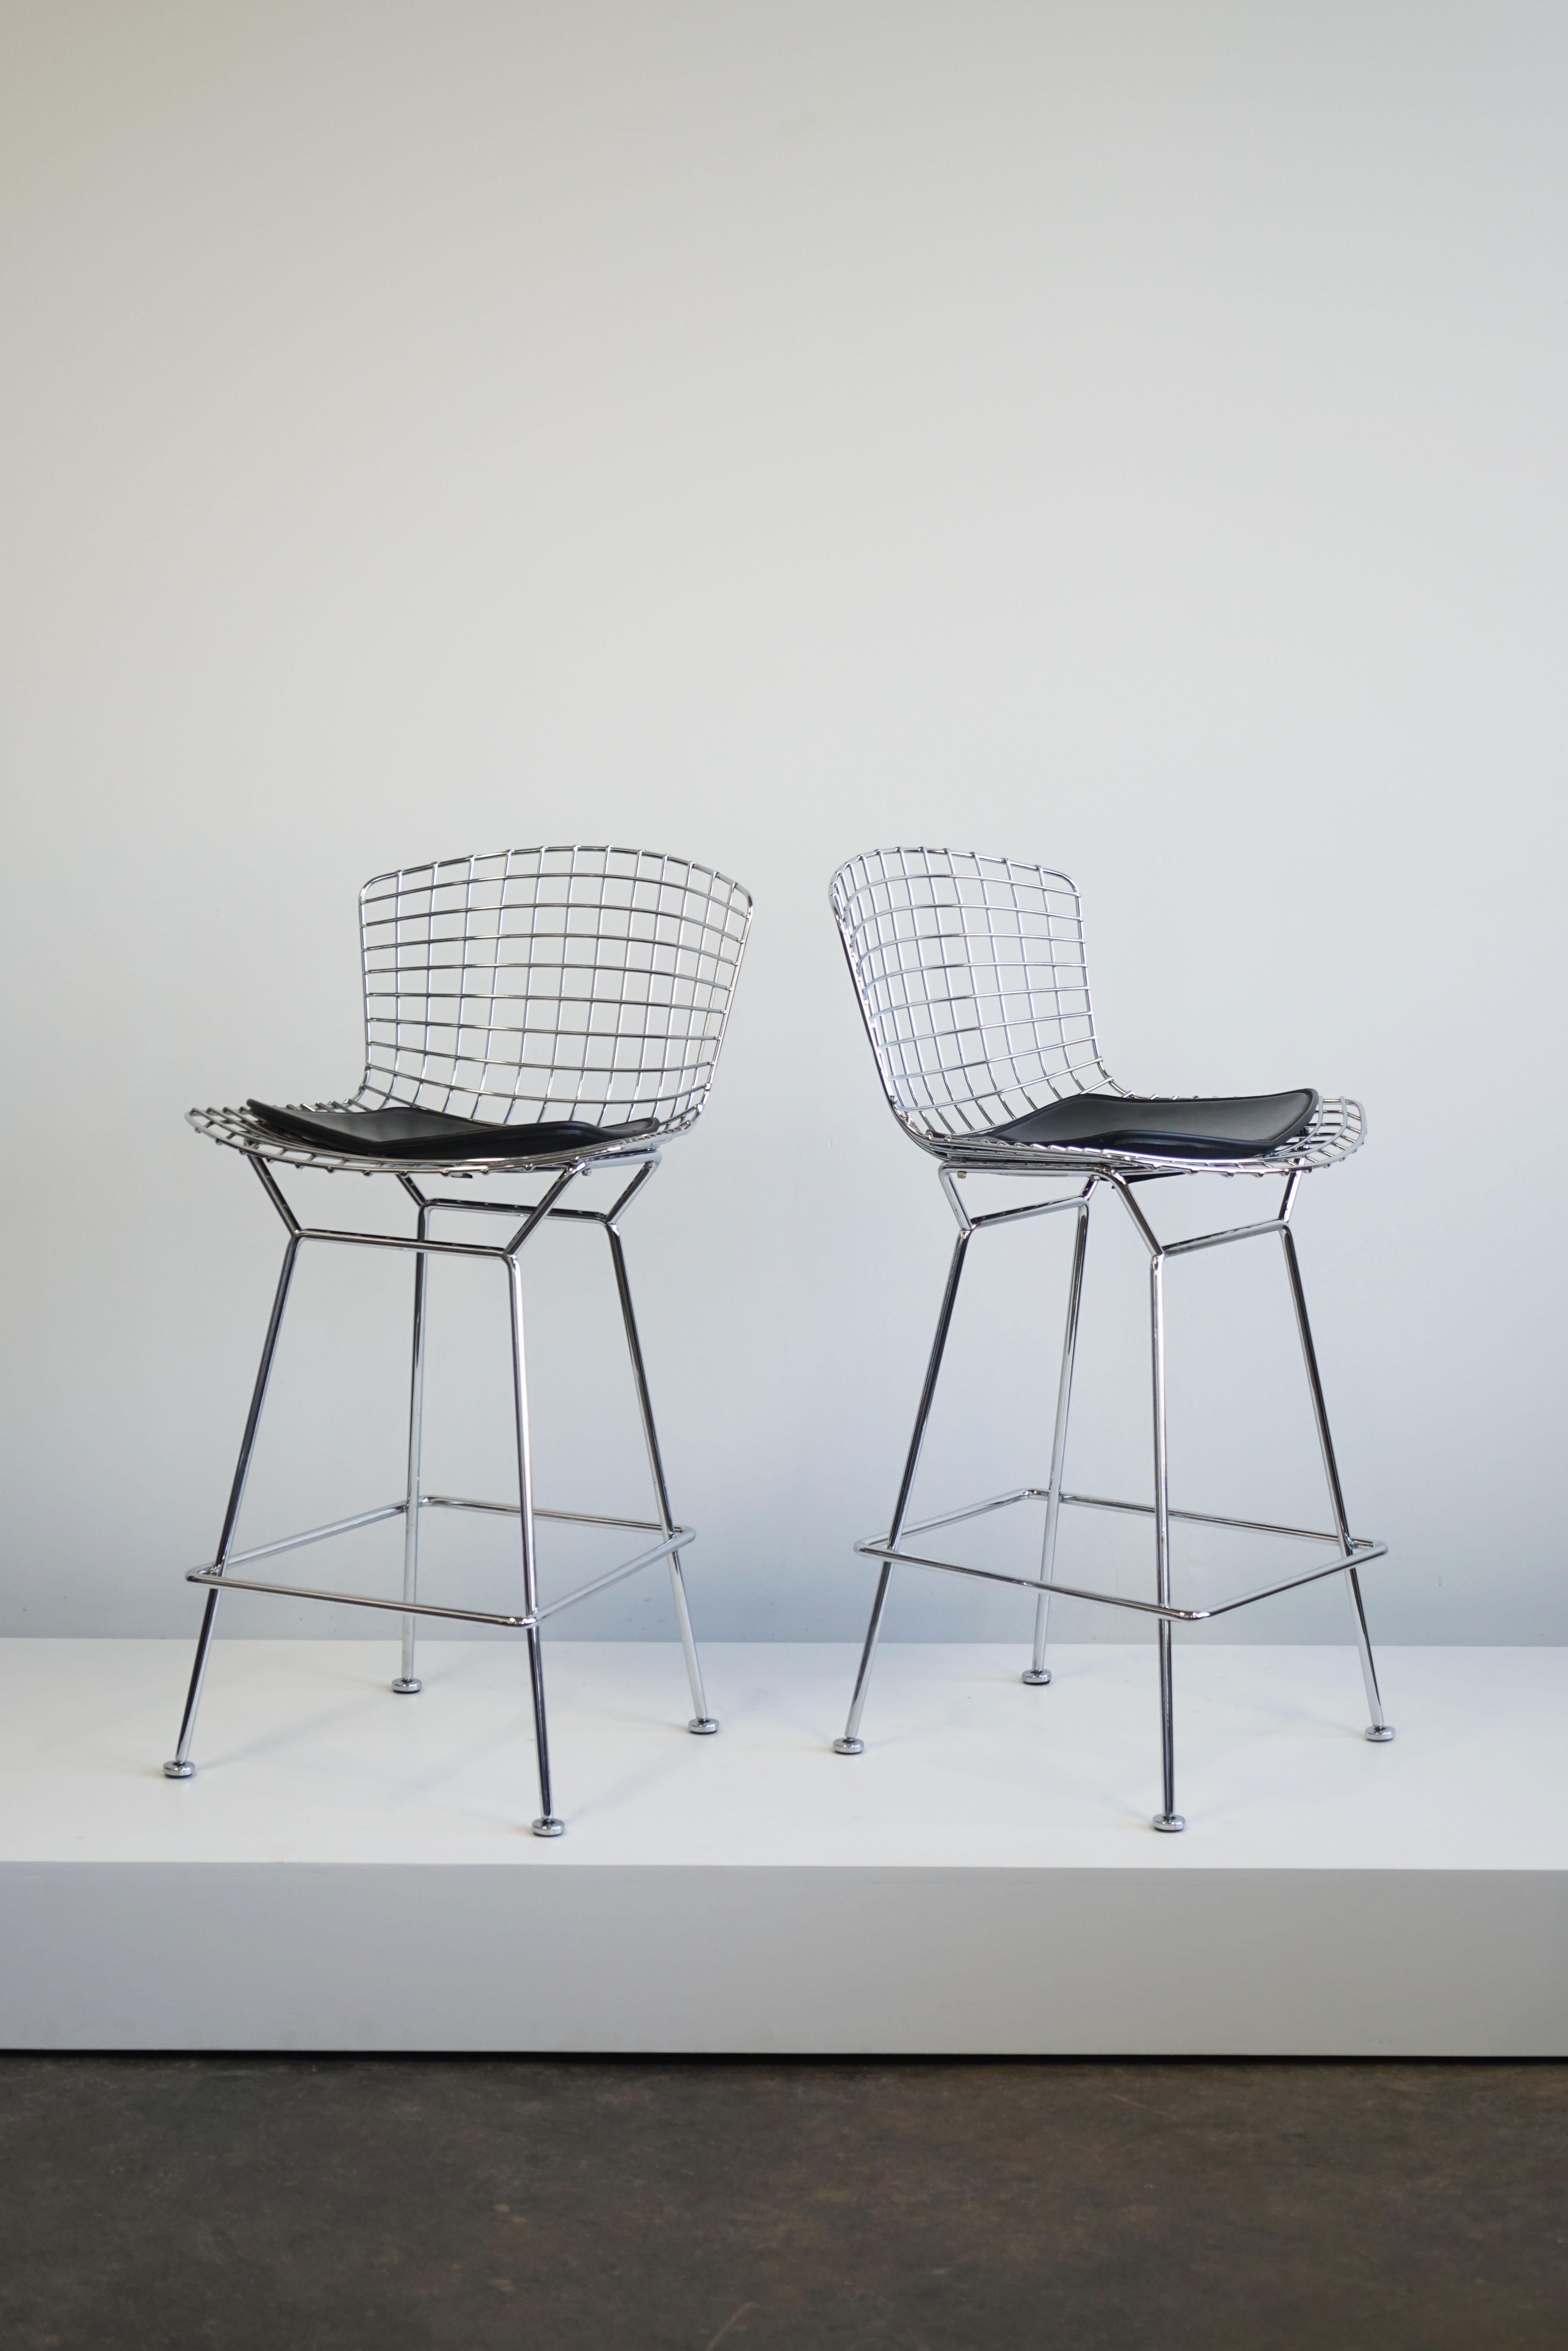 Steel A pair of Harry Bertoia Bar stools for Knoll, set of 2 with black pads